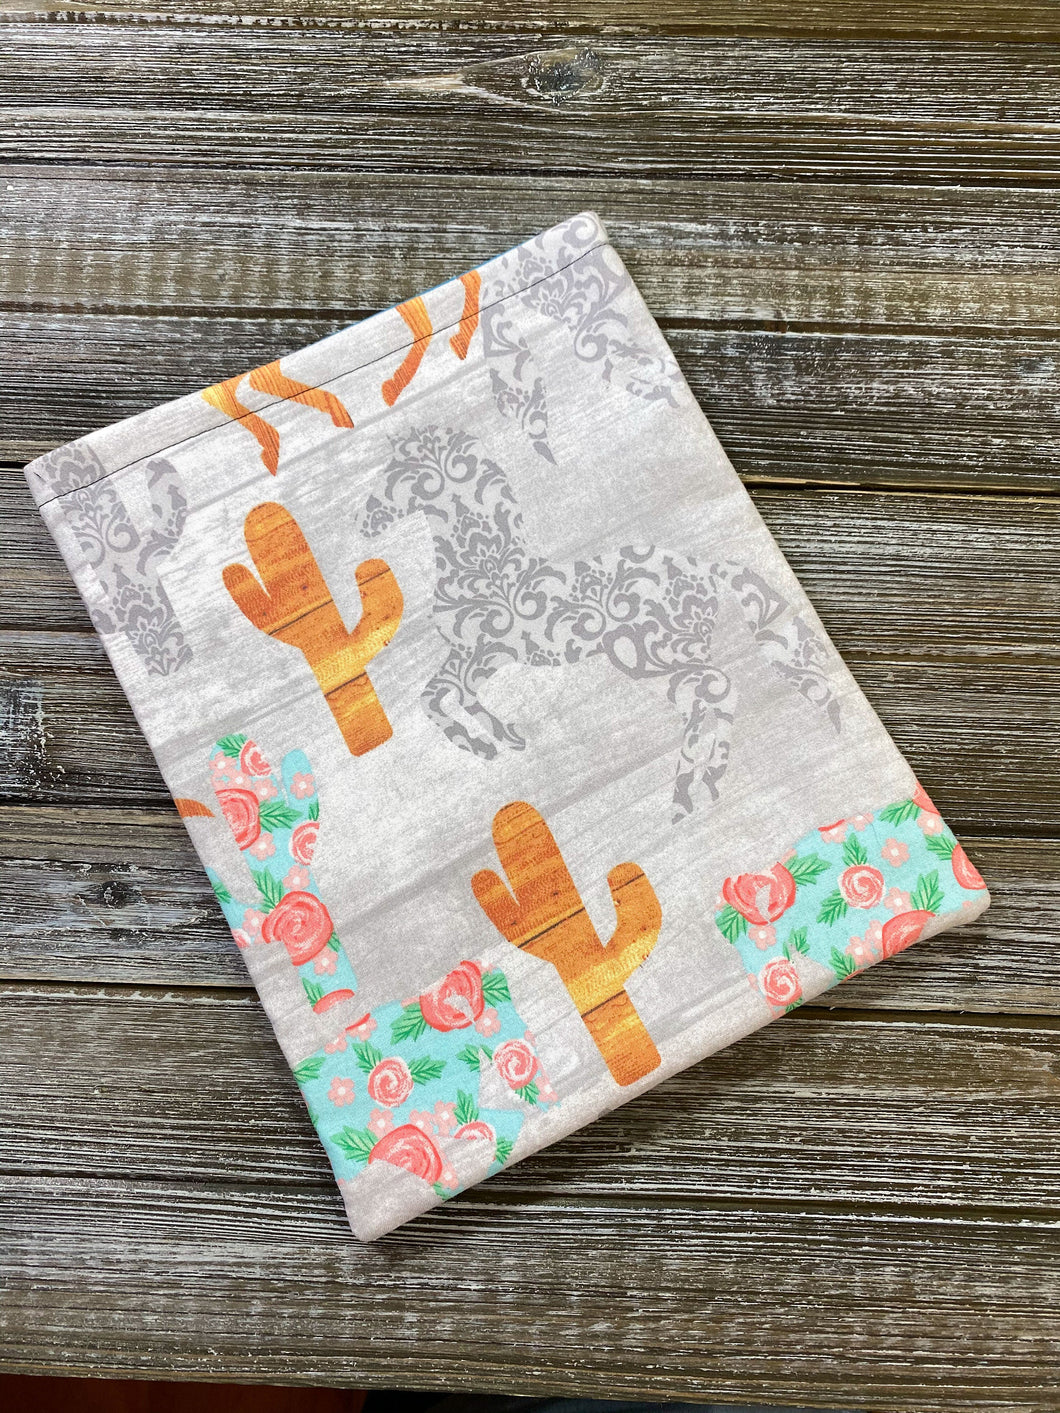 Cactus & Paisley Horses Southwestern Book Sleeve | Kindle Accessory | Protective Book Bag | Book Pouch | Horse Lover Bookish Nerd Gift